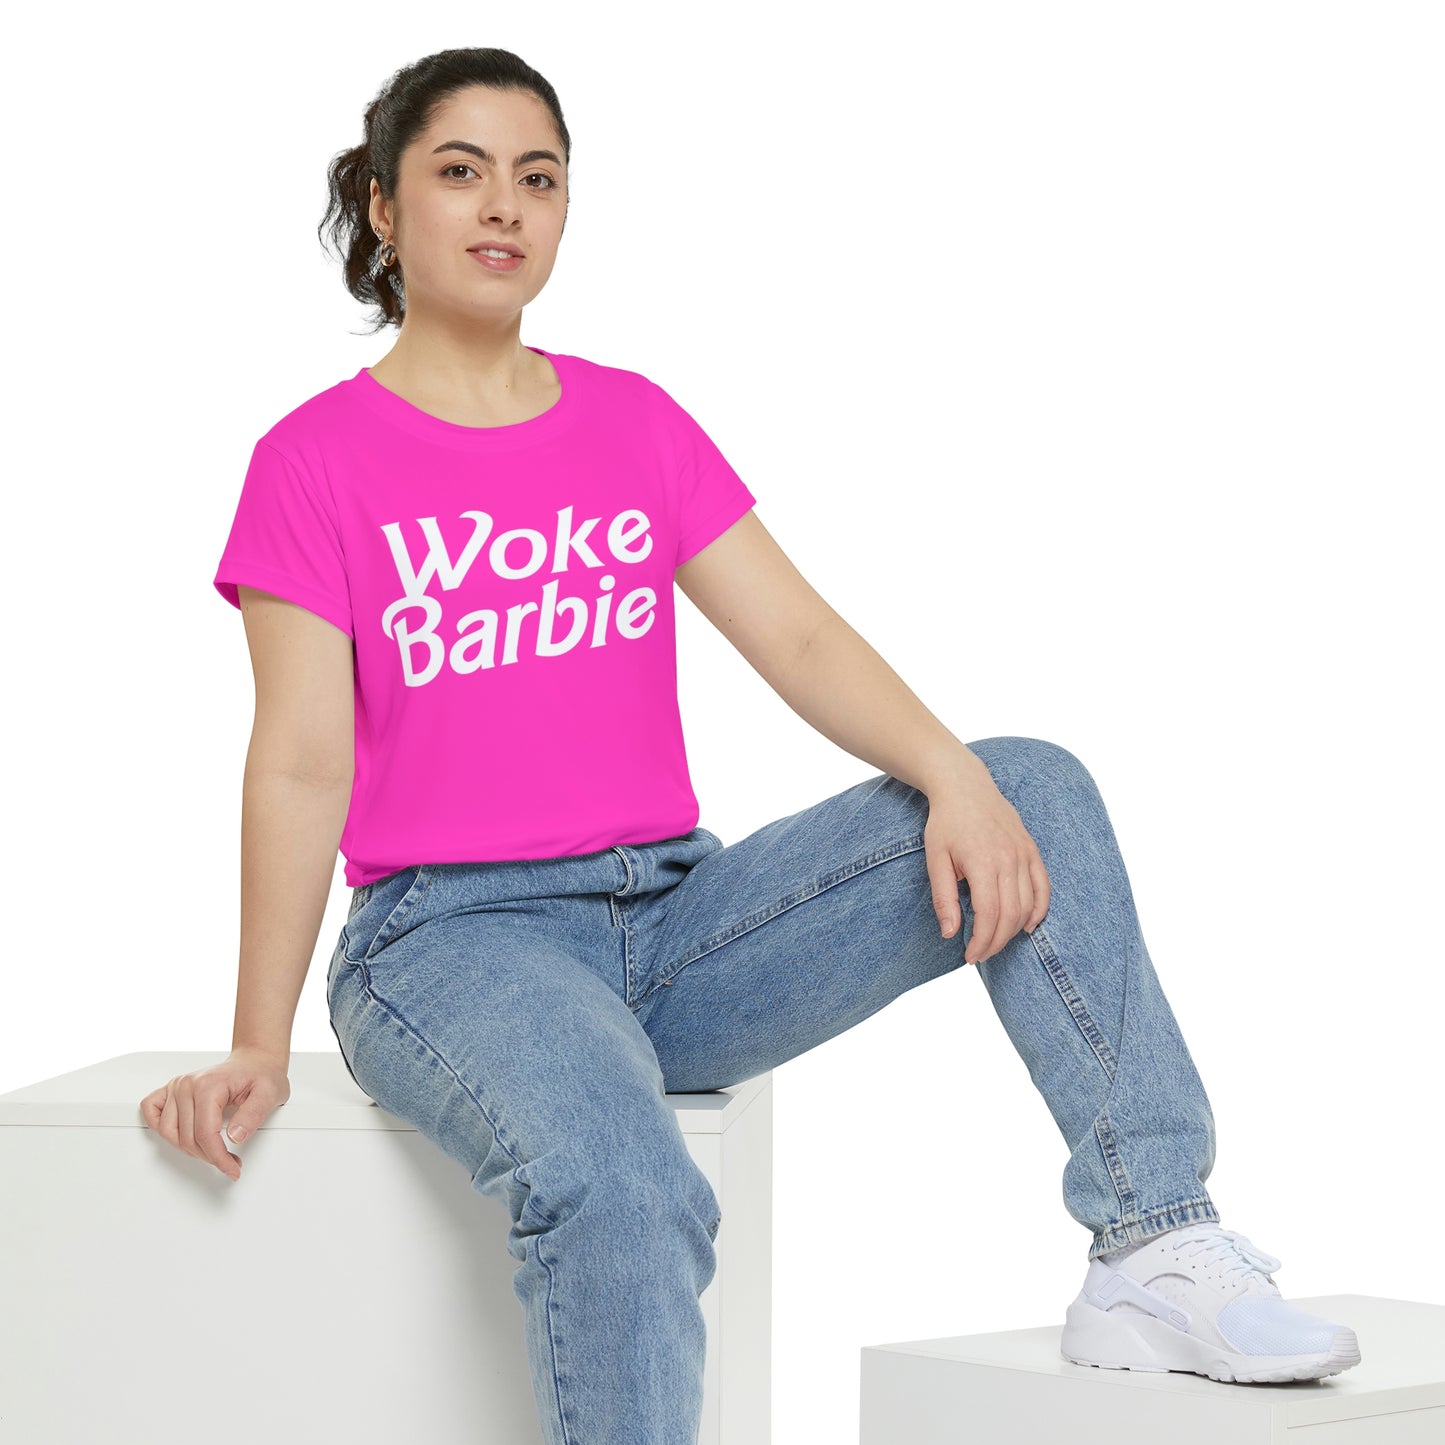 Woke Barbie, Bachelorette Party Shirts, Bridesmaid Gifts, Here comes the Party Tees, Group Party Favor Shirts, Bridal Party Shirt for women